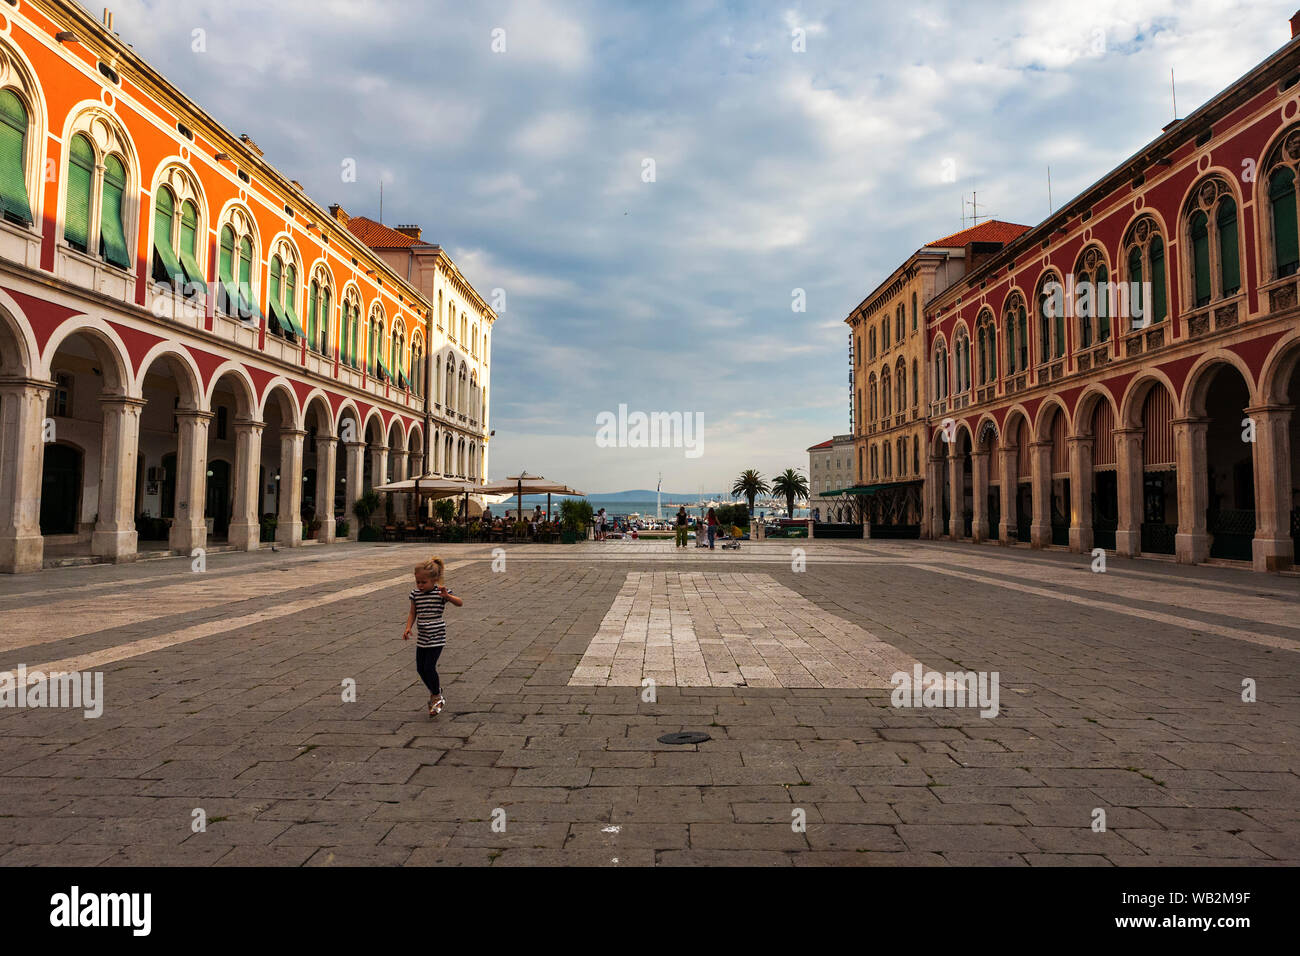 A single child plays in the grand Trg Republike, popularly known as Prokurative, Split, Croatia Stock Photo